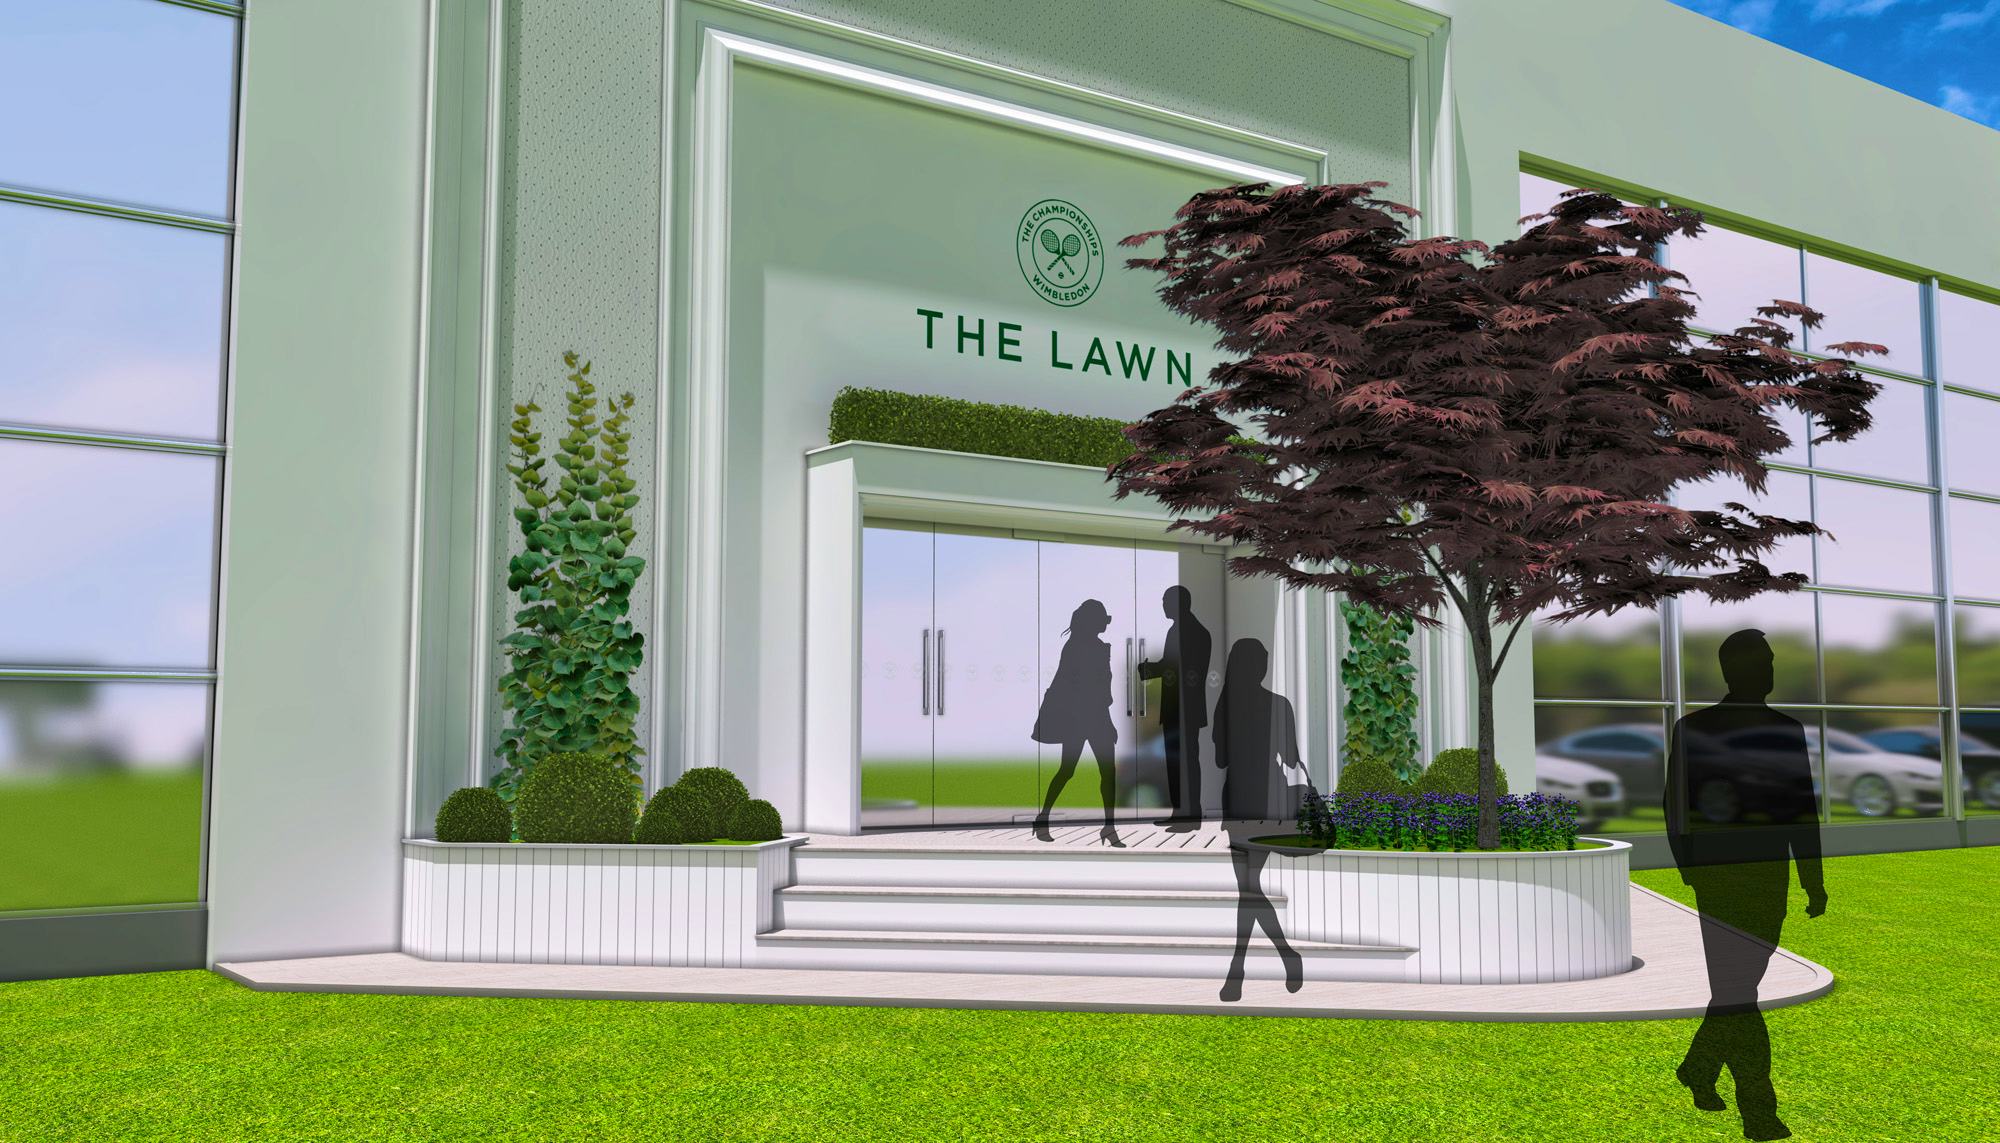 Keith Prowse hospitality Wimbledon the lawn entrance